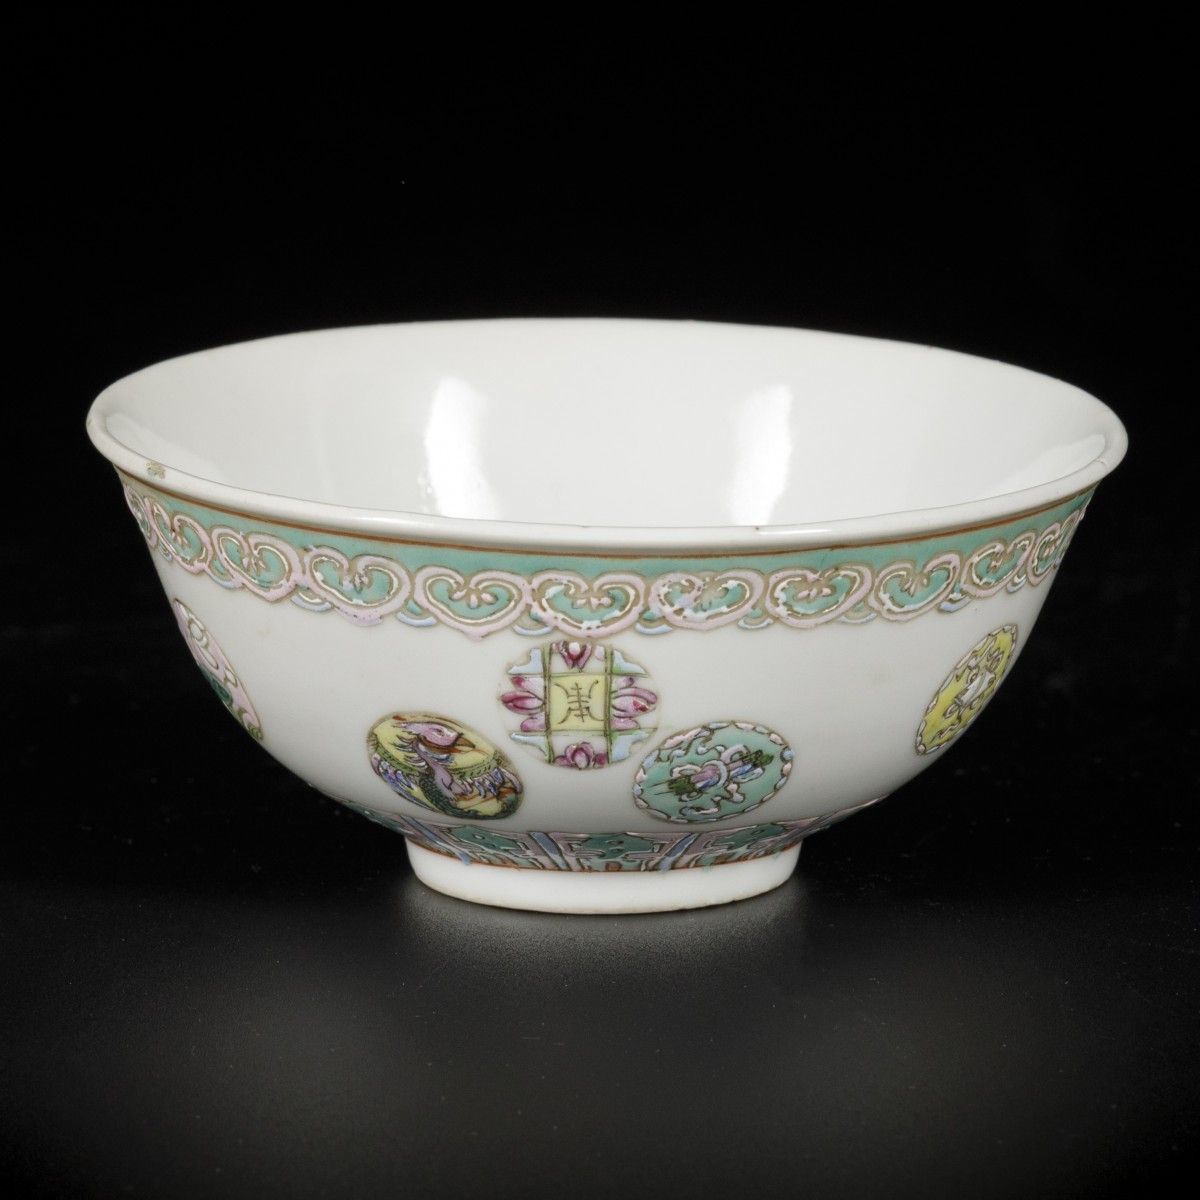 A porcelain bowl decorated with various symbols, marked Qianglong, China, Republ&hellip;